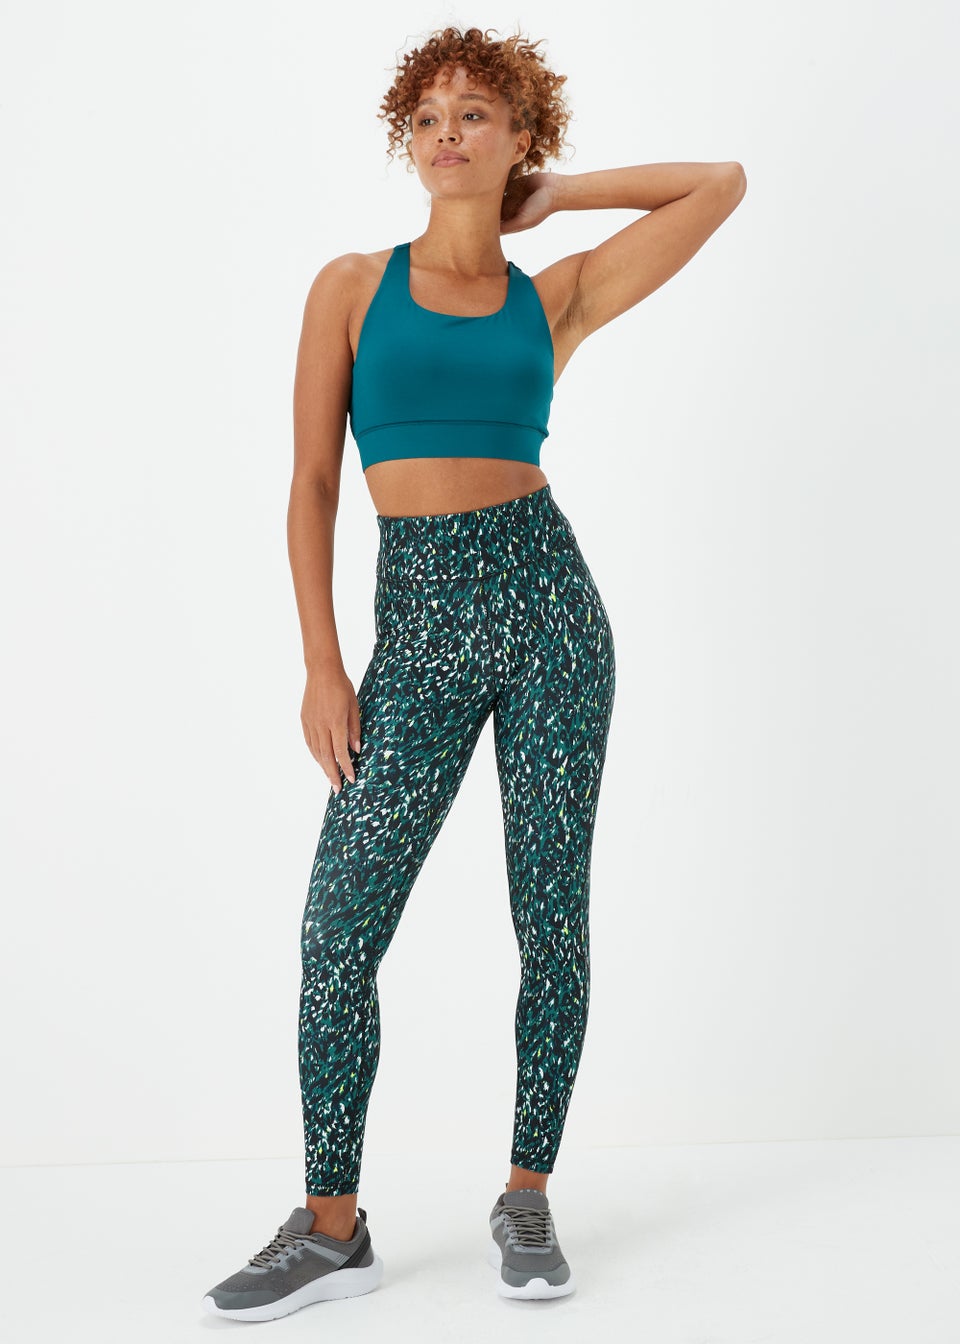 Funky Patterned Colourful Leggings and Activewear